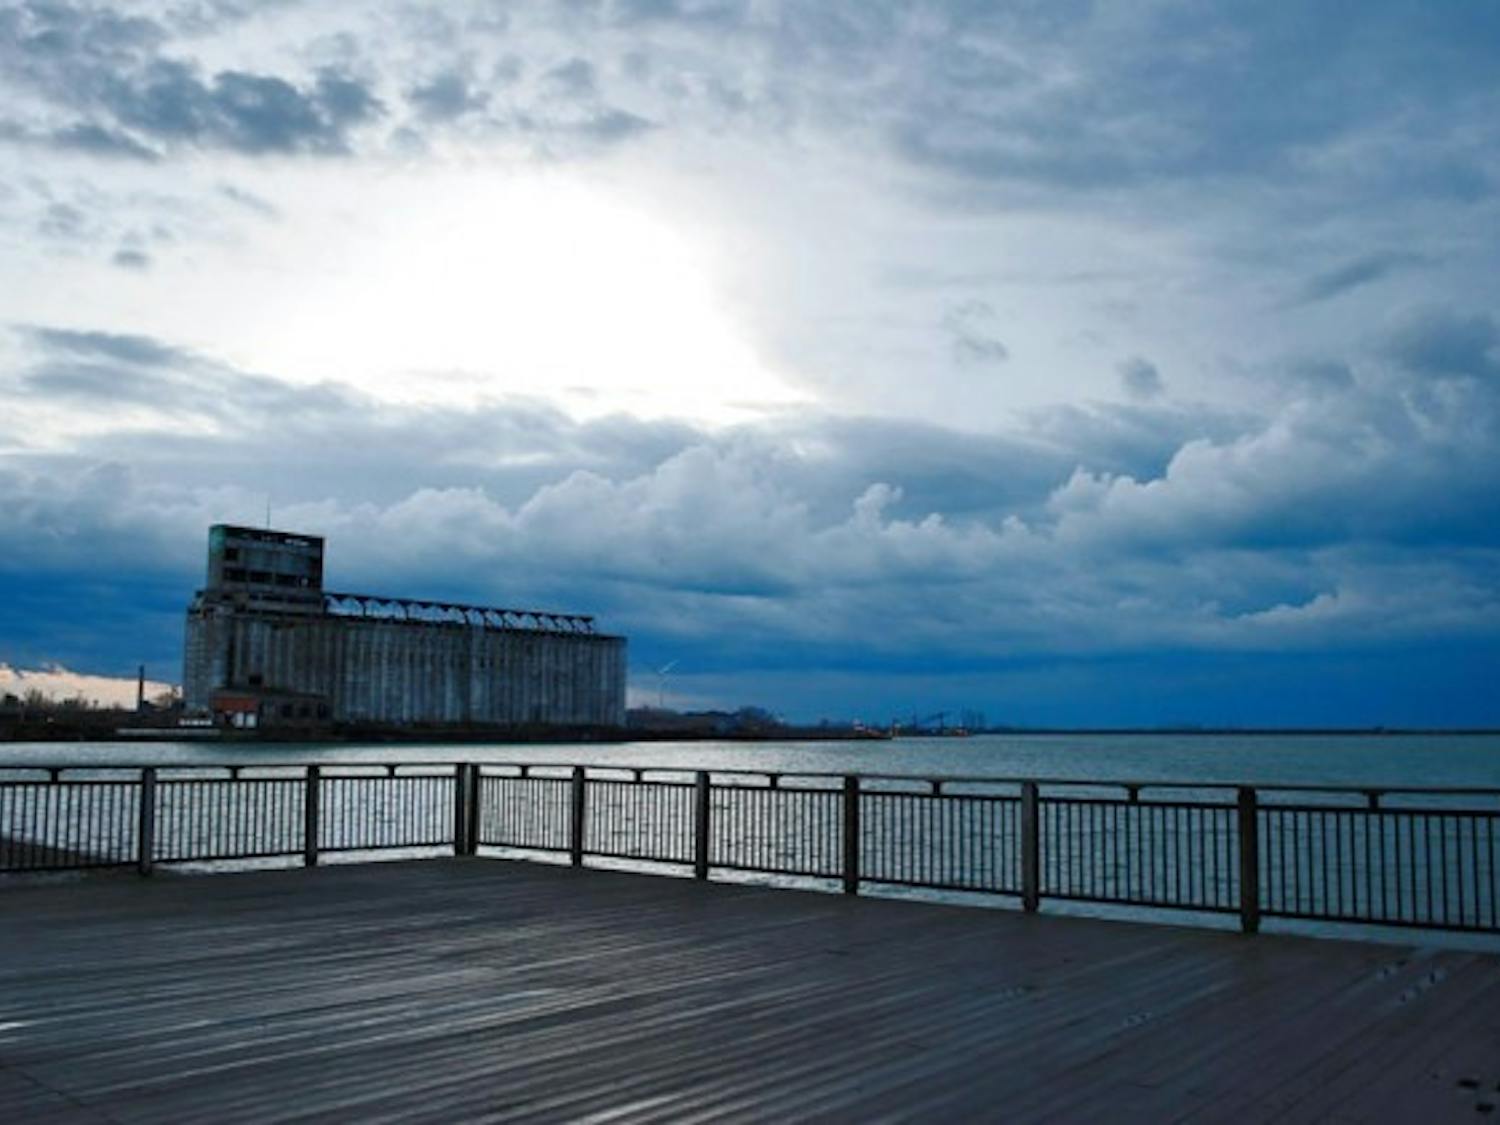 Buffalo&rsquo;s waterfront, from Canalside to the Outer Harbor, is perfect for a romantic, and free, date.
Gallagher Beach Pier, shown here, offers spectacular views of some of Buffalo&rsquo;s grain silos.
Courtesy of Teresa Calfo